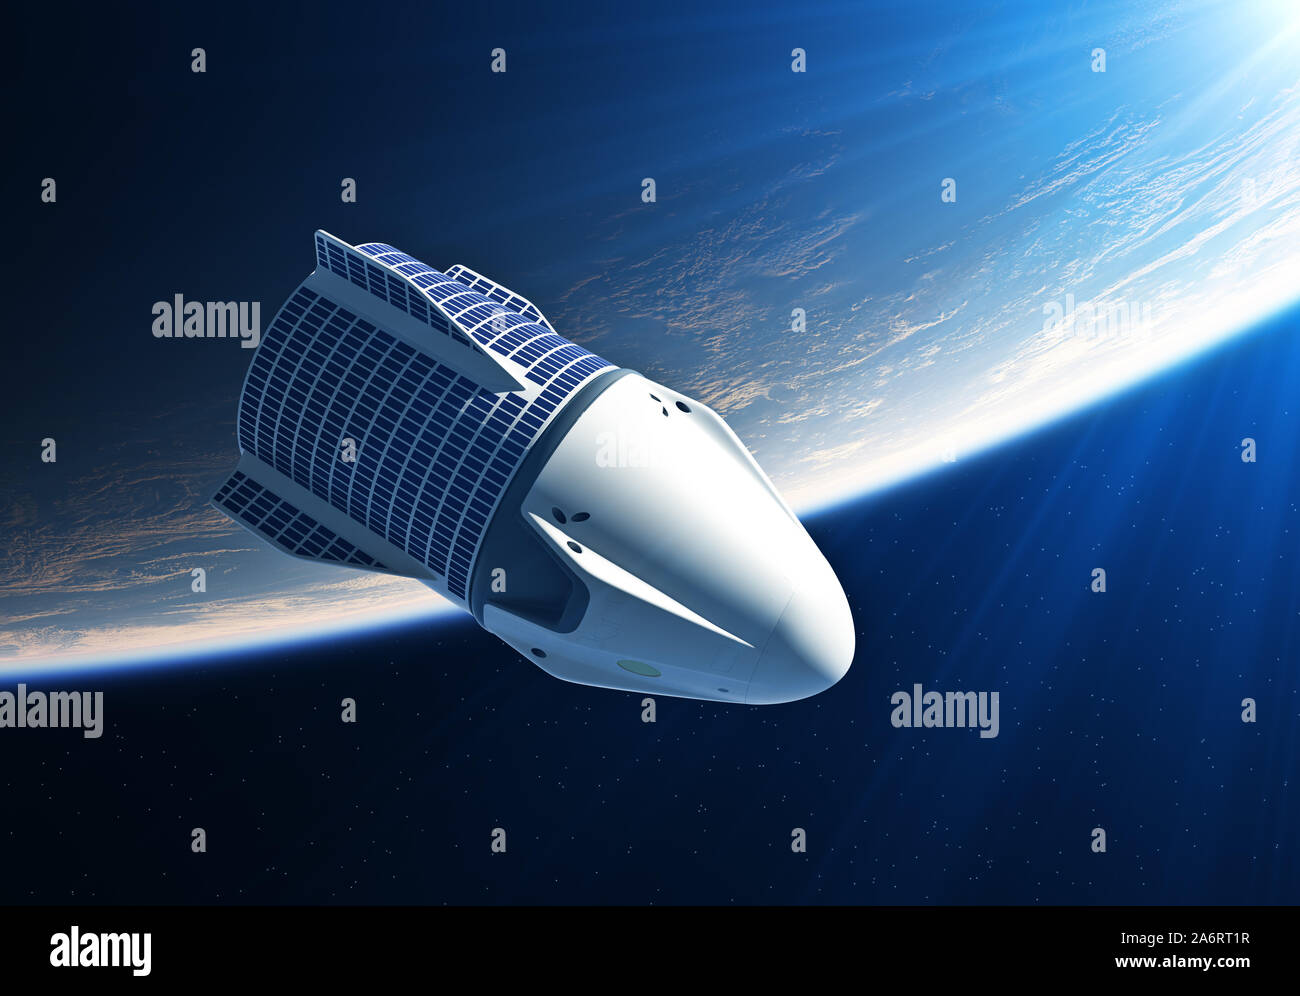 Commercial Spacecraft In The Rays Of Blue Sun. 3D Illustration. Stock Photo